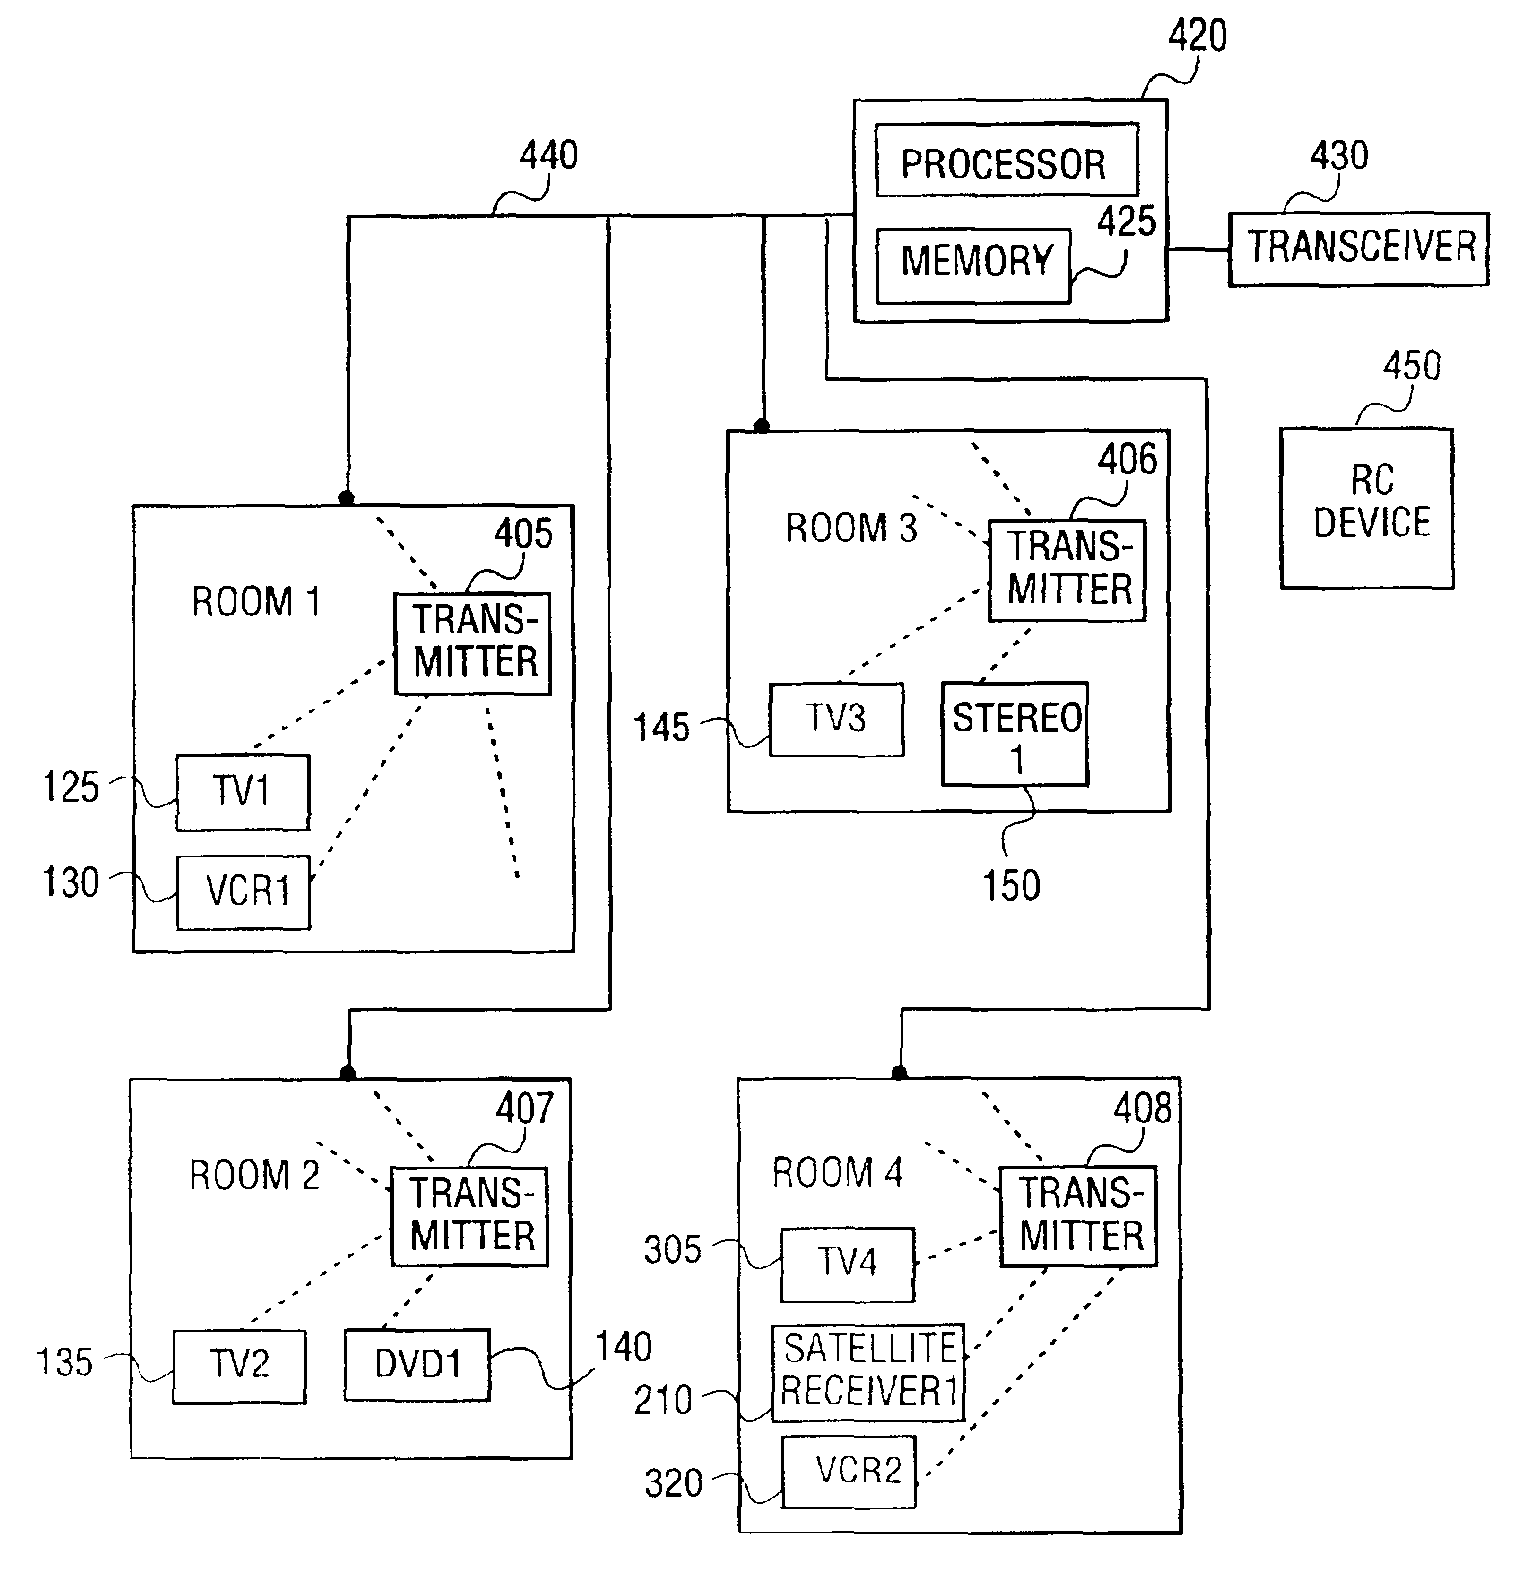 Method and apparatus to locate a device in a dwelling or other enclosed space